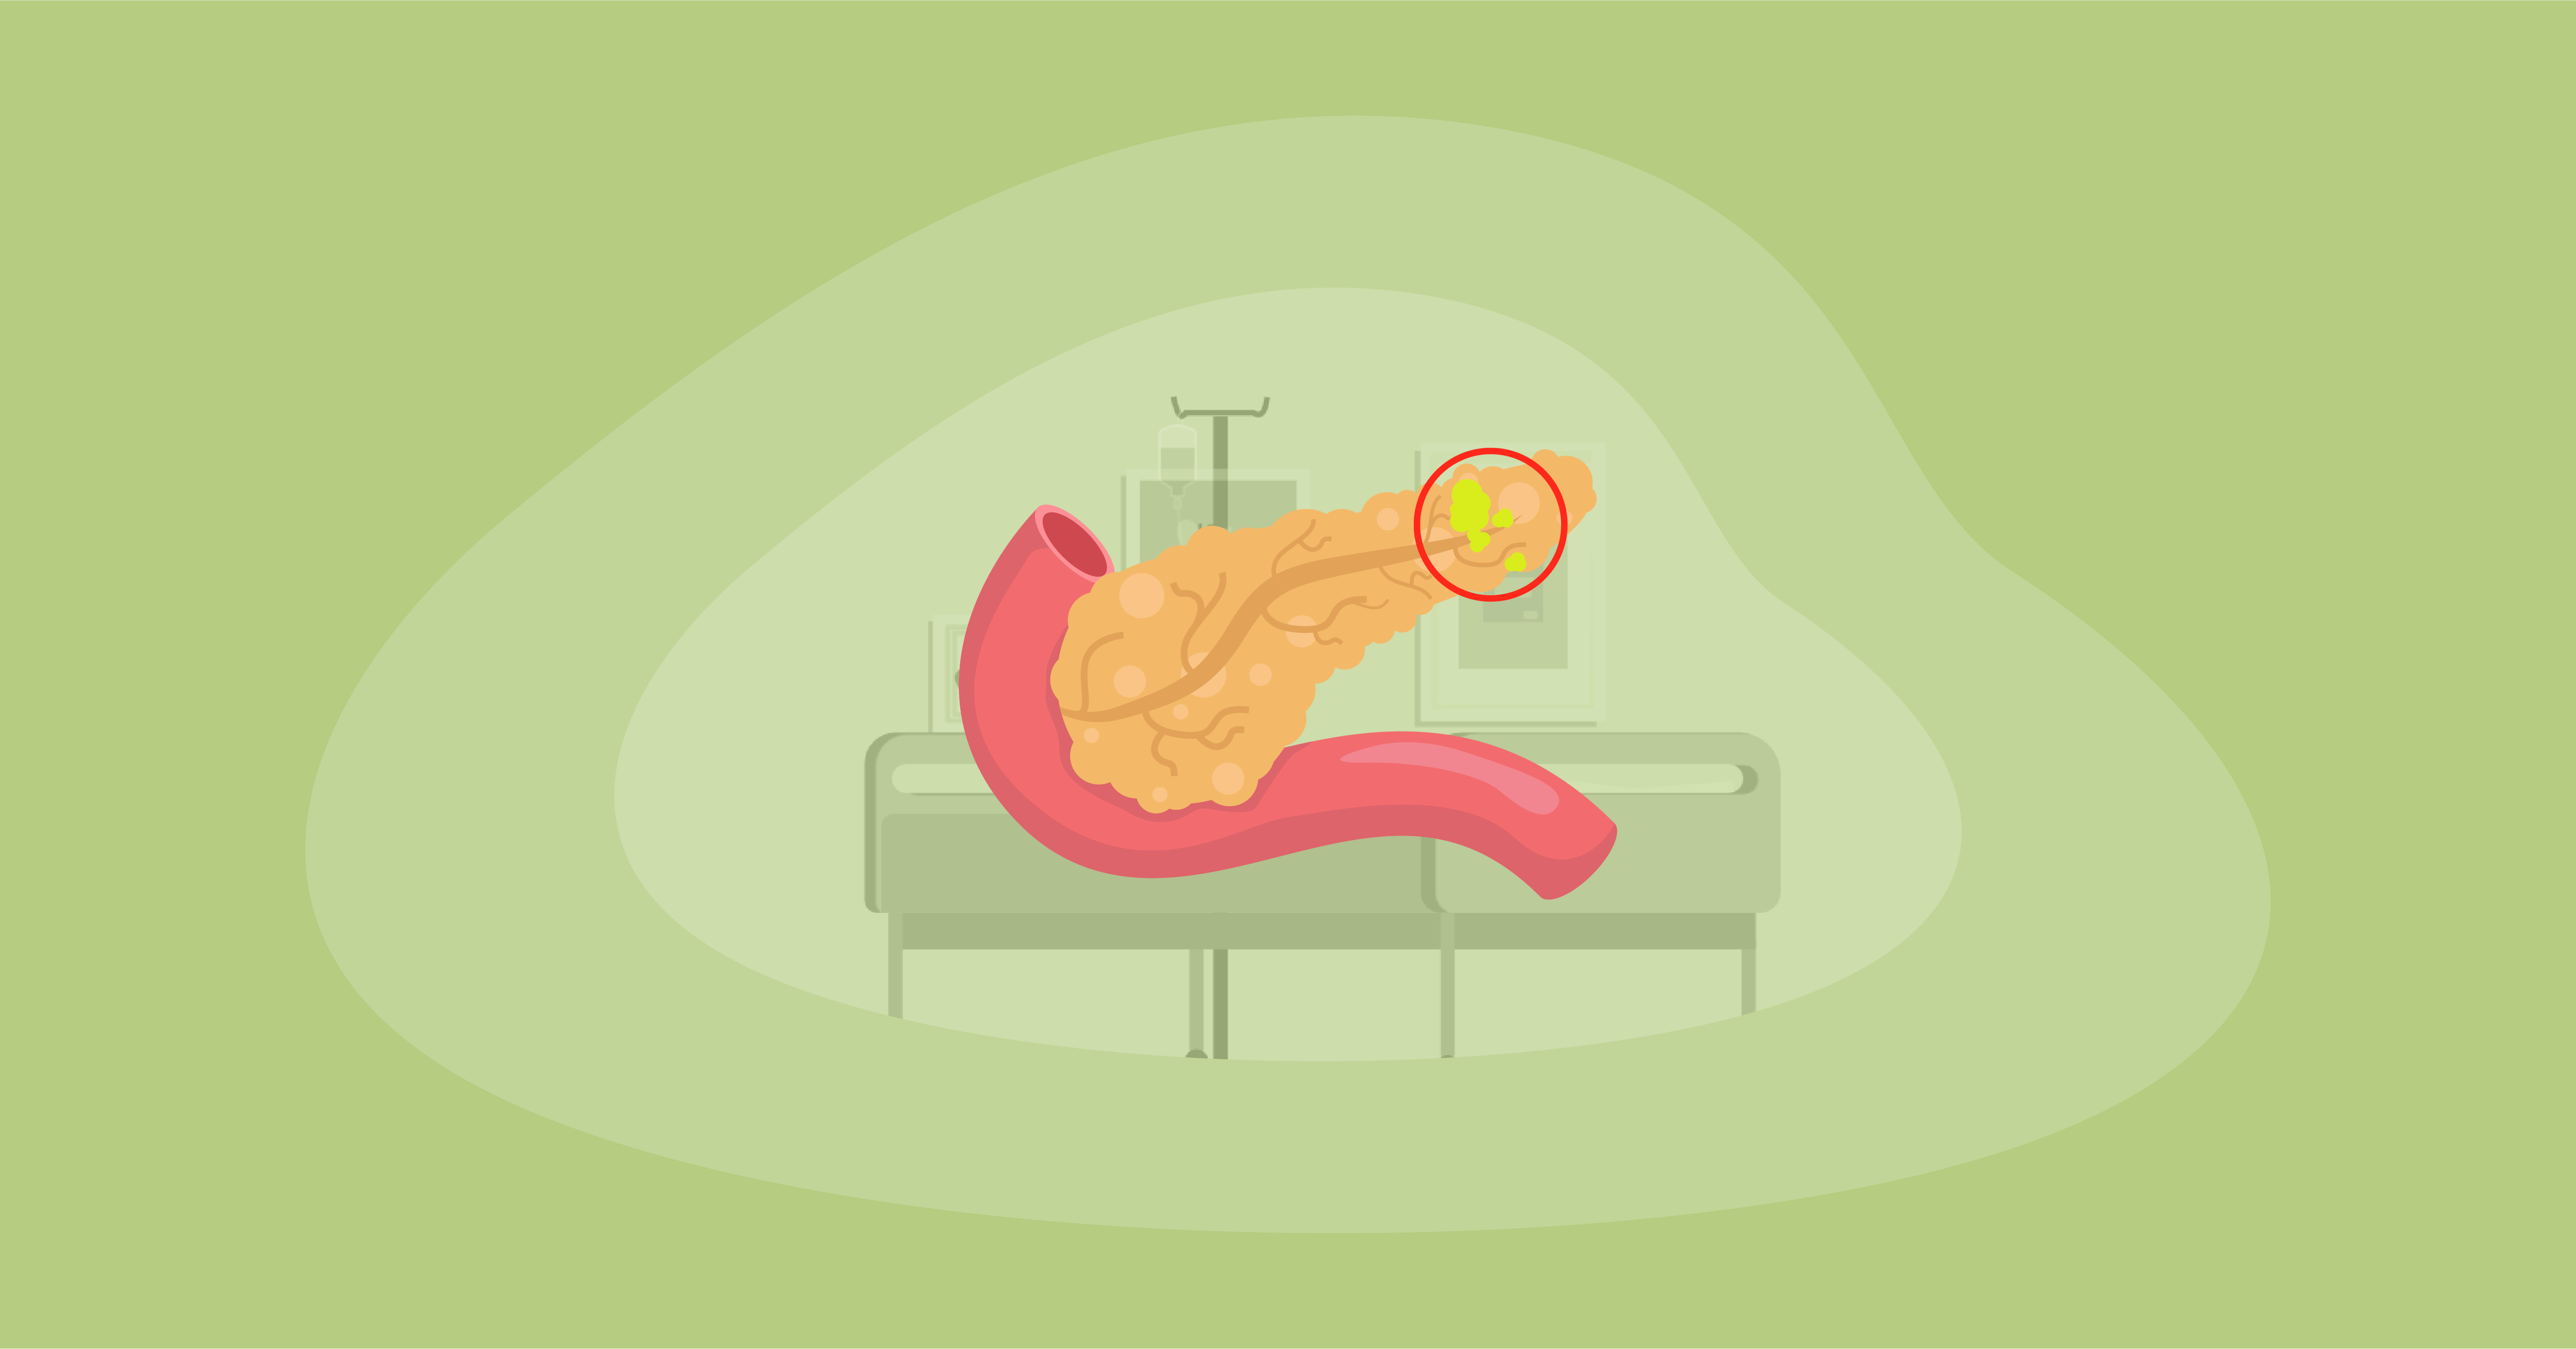 Attempted illustration of pancreatic cancer